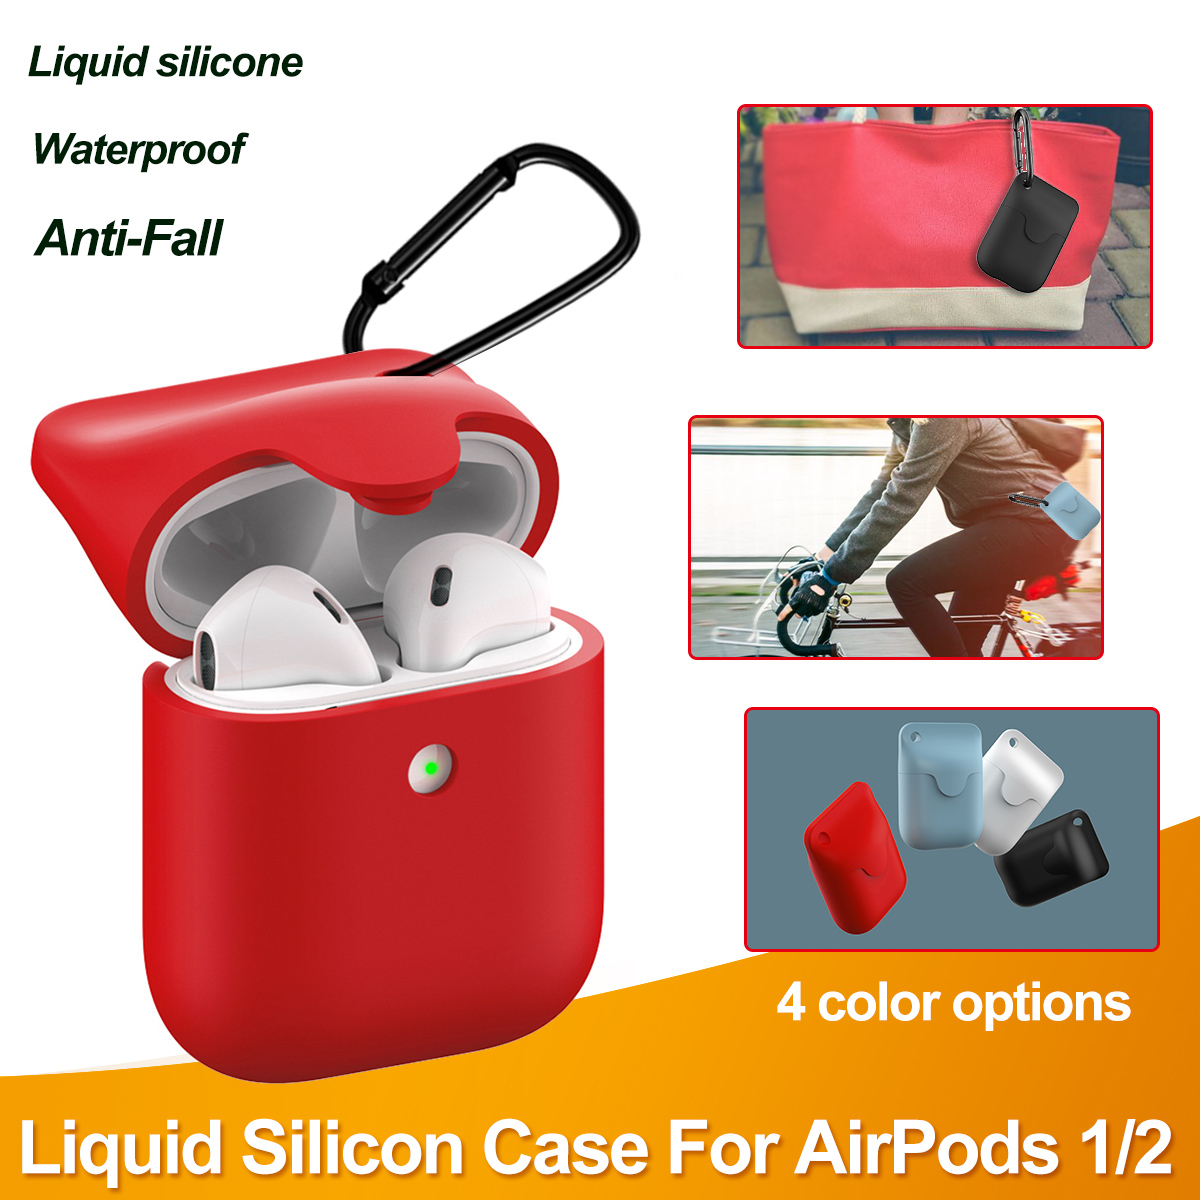 Liquid-Silicone-Shockproof-Waterproof-Earphone-Storage-Case-with-KeyChain-for-Apple-Airpods-1--2-1648016-2